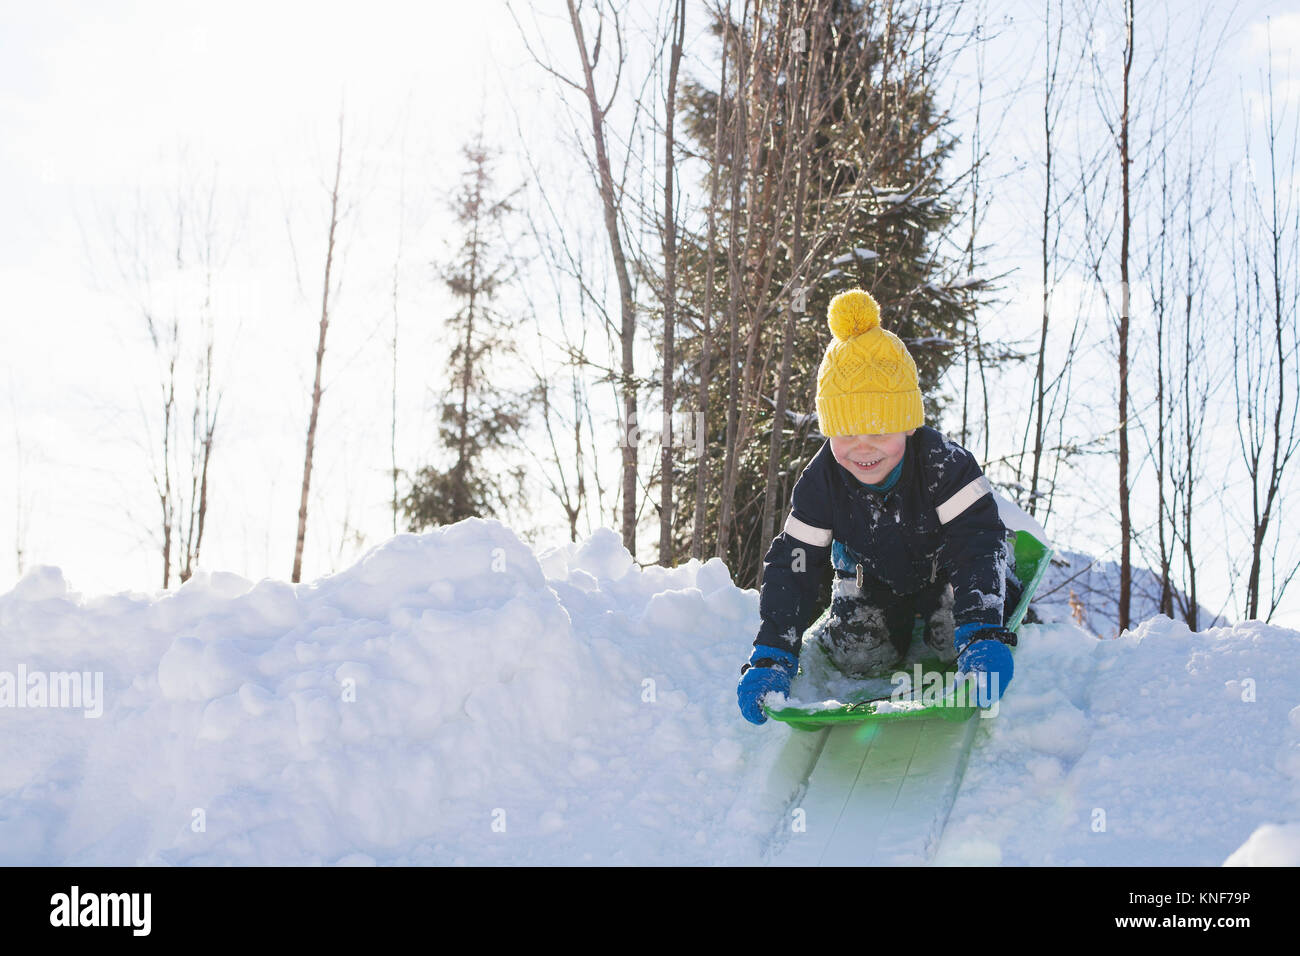 Boy in yellow knit hat tobogganing on snow covered hill Stock Photo